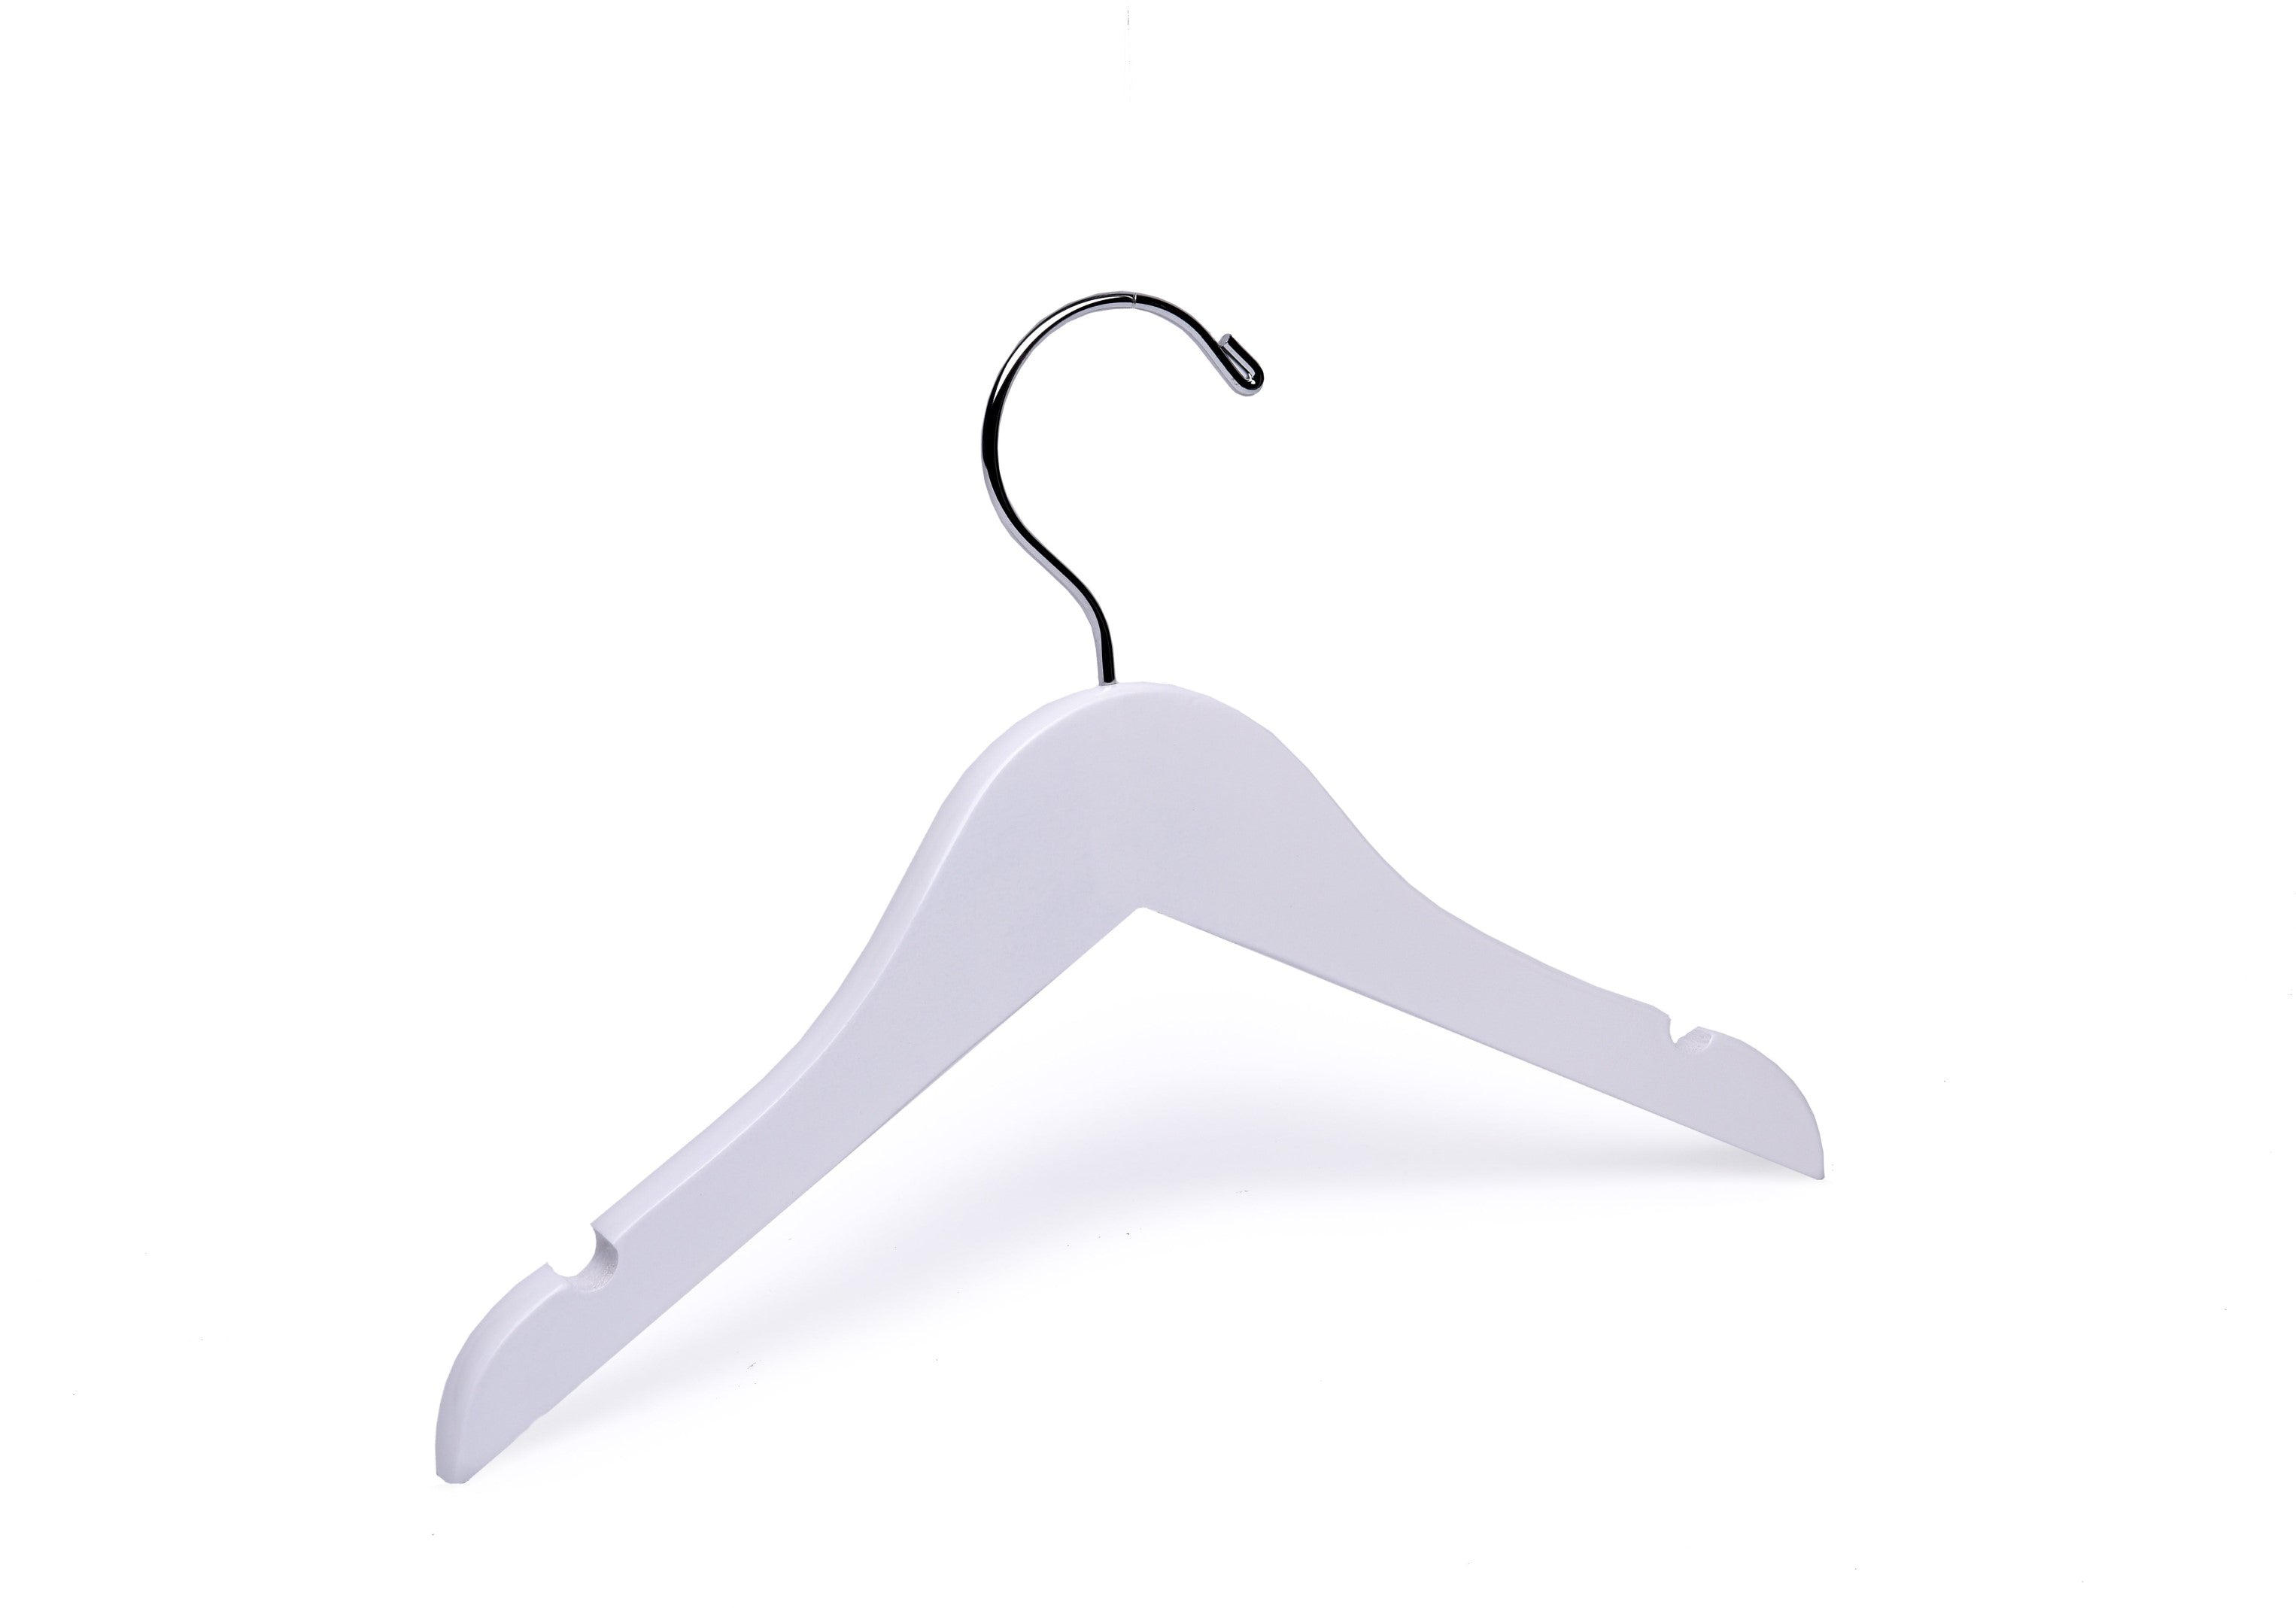 Baby White Top & Bottom Mix Wooden Hangers (Silver or Gold Hardware)